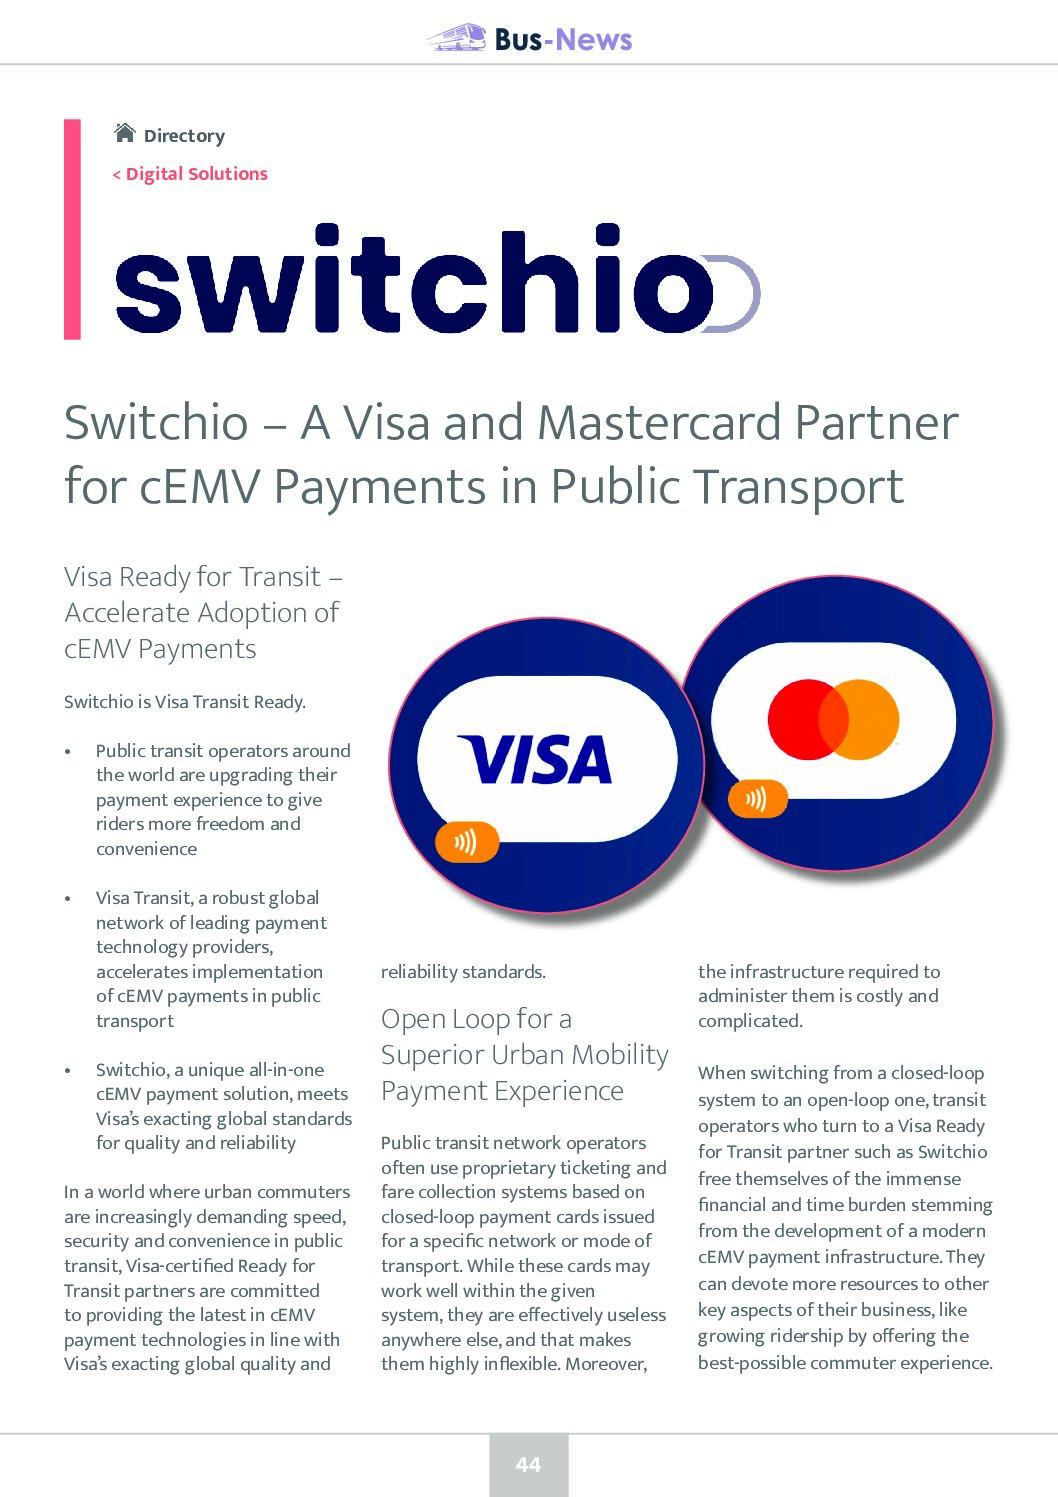 Visa and Mastercard Partner for cEMV Payments in Public Transport